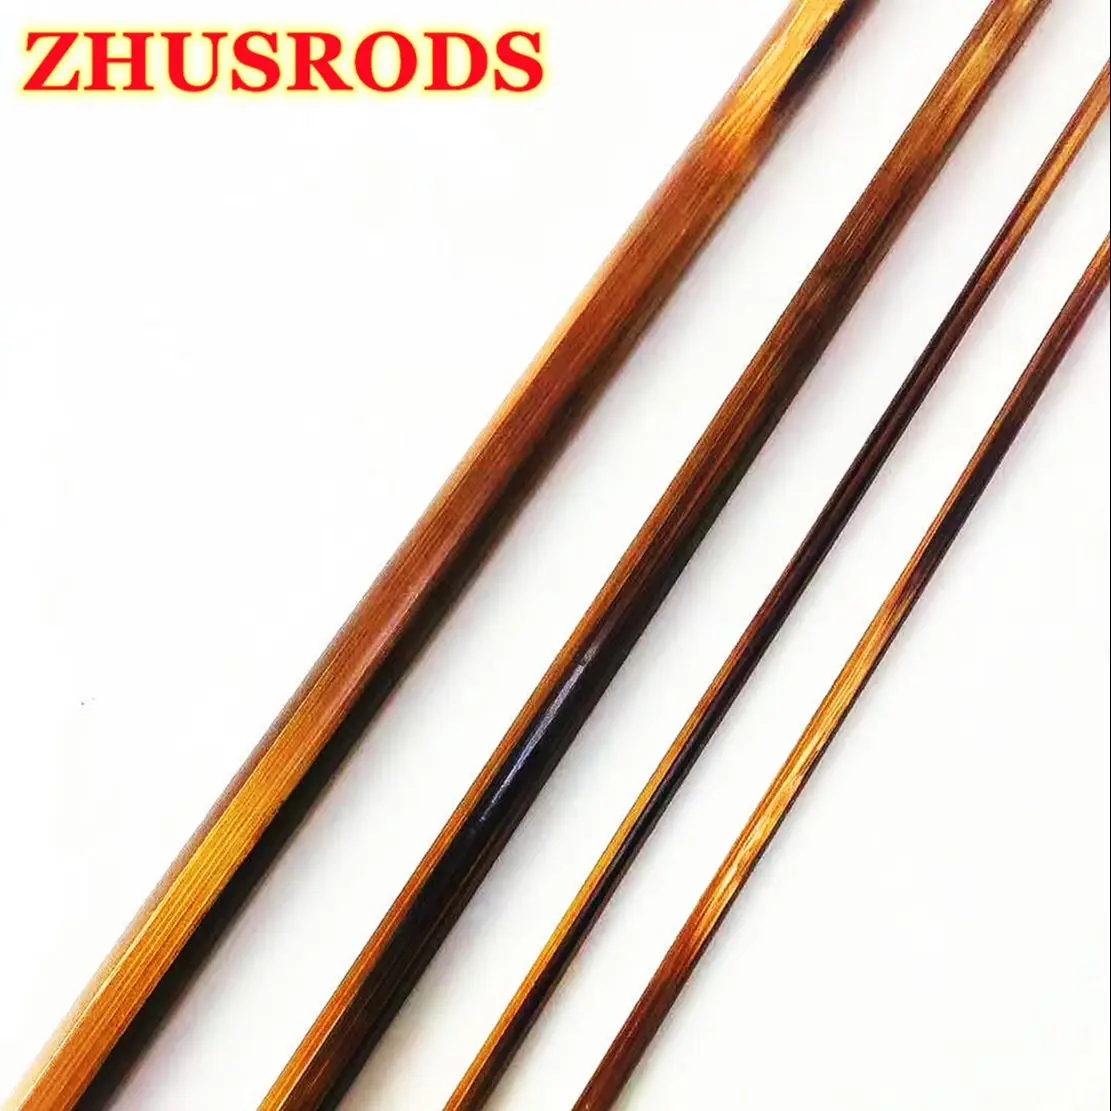 3-Sections ZHUSRODS Flame Bamboo Fly Rod Blanks / Fly Fishing